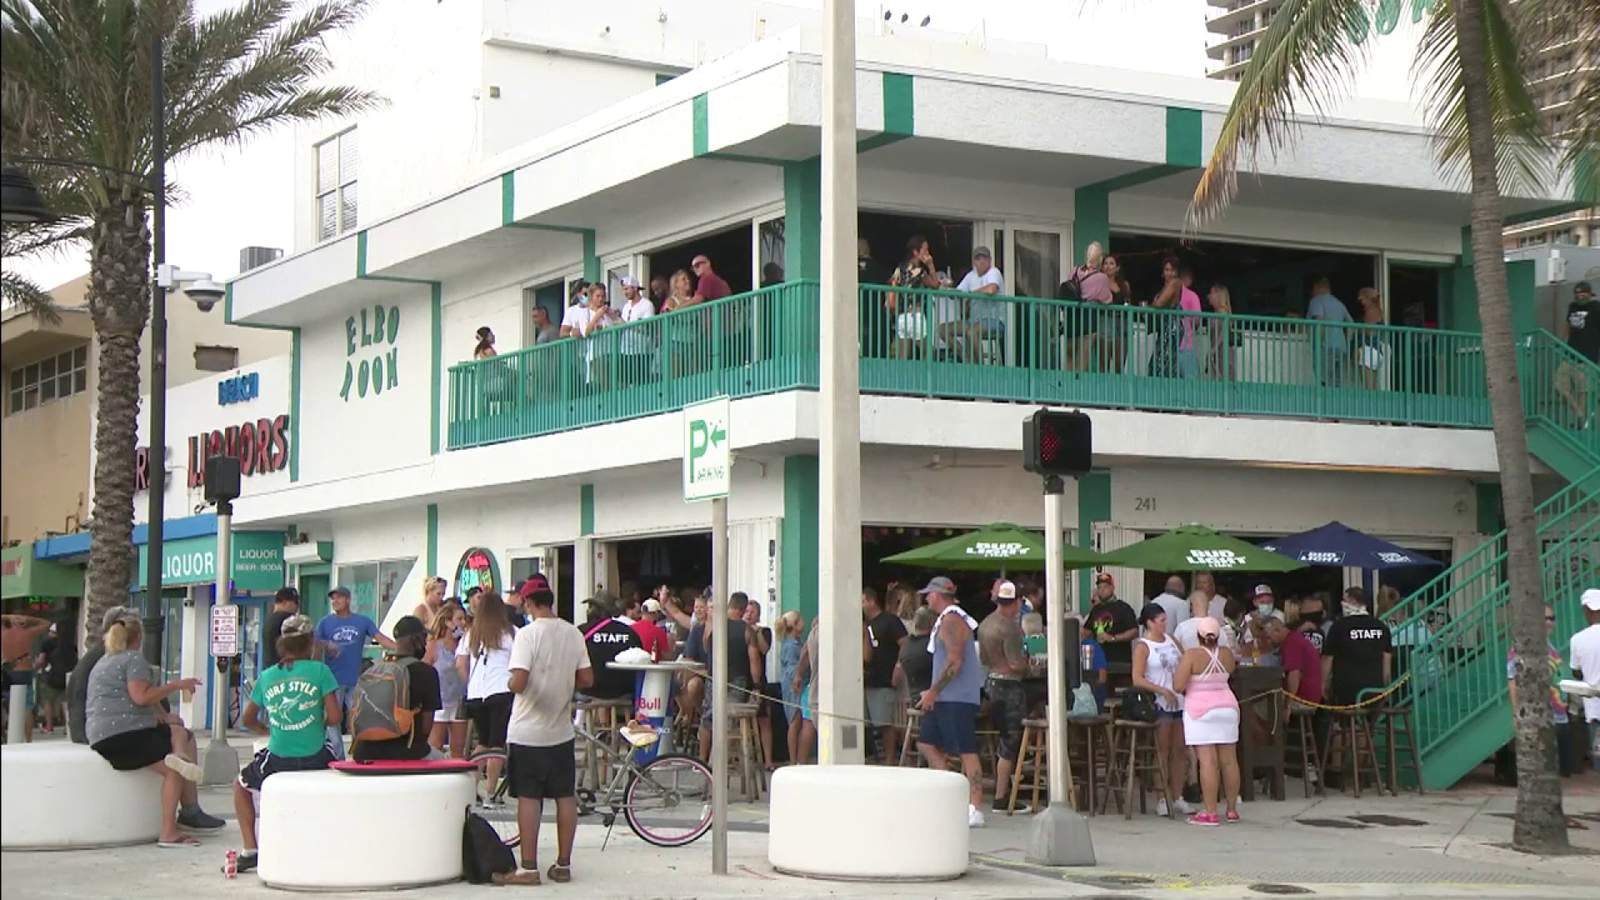 South Florida bars packed after Gov. gives OK for Phase 3 reopening